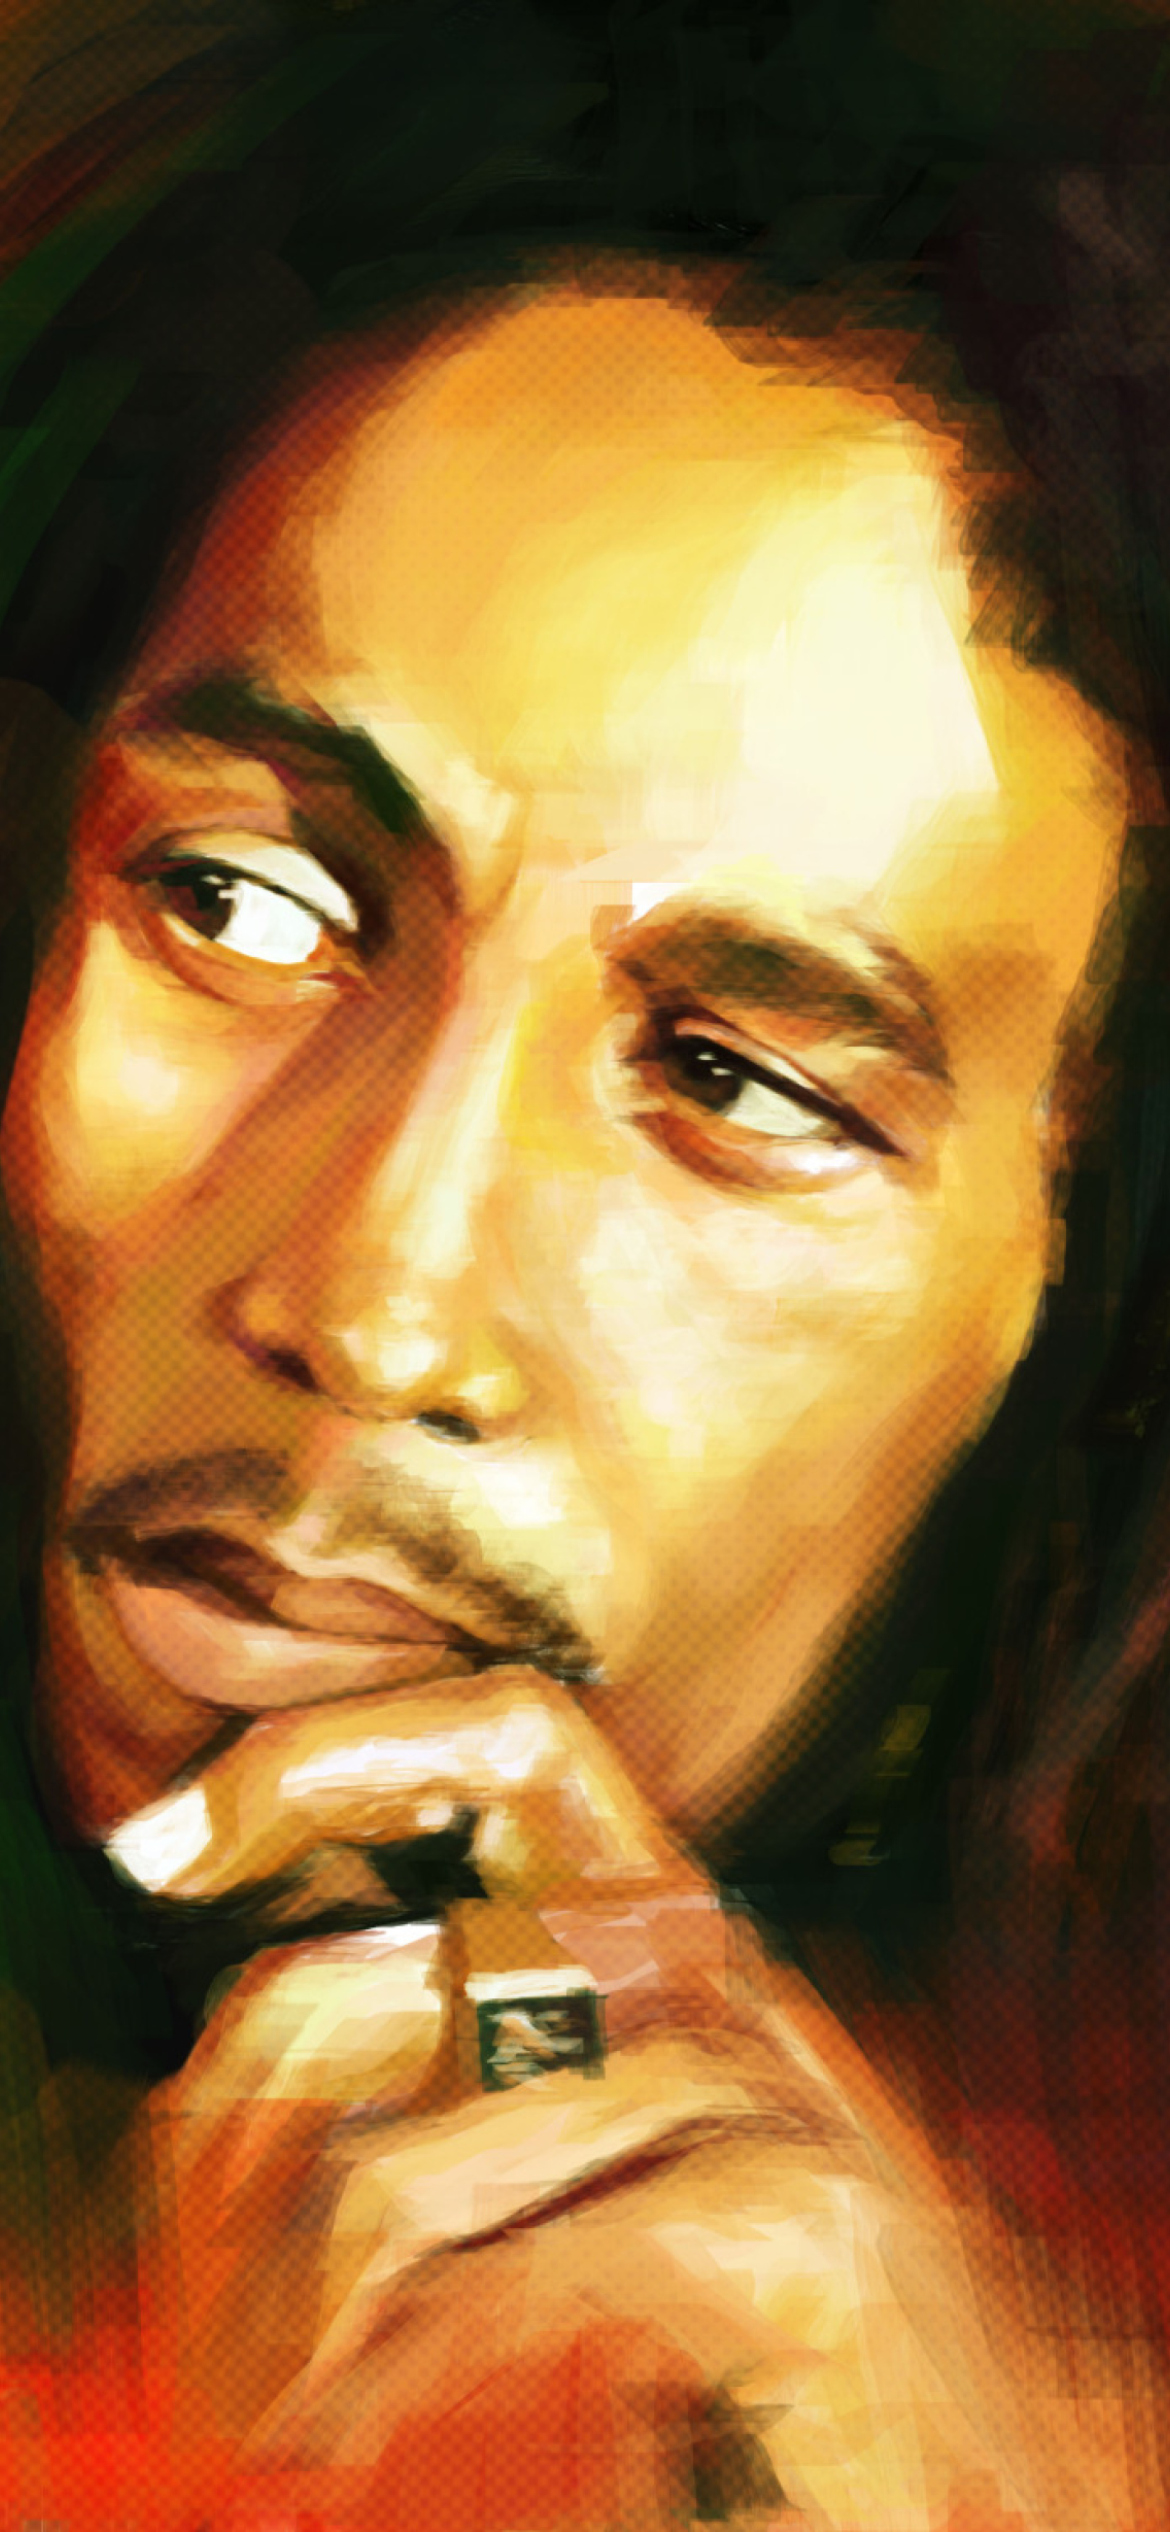 How to Draw/Paint Bob Marley Portrait Step by Step - YouTube